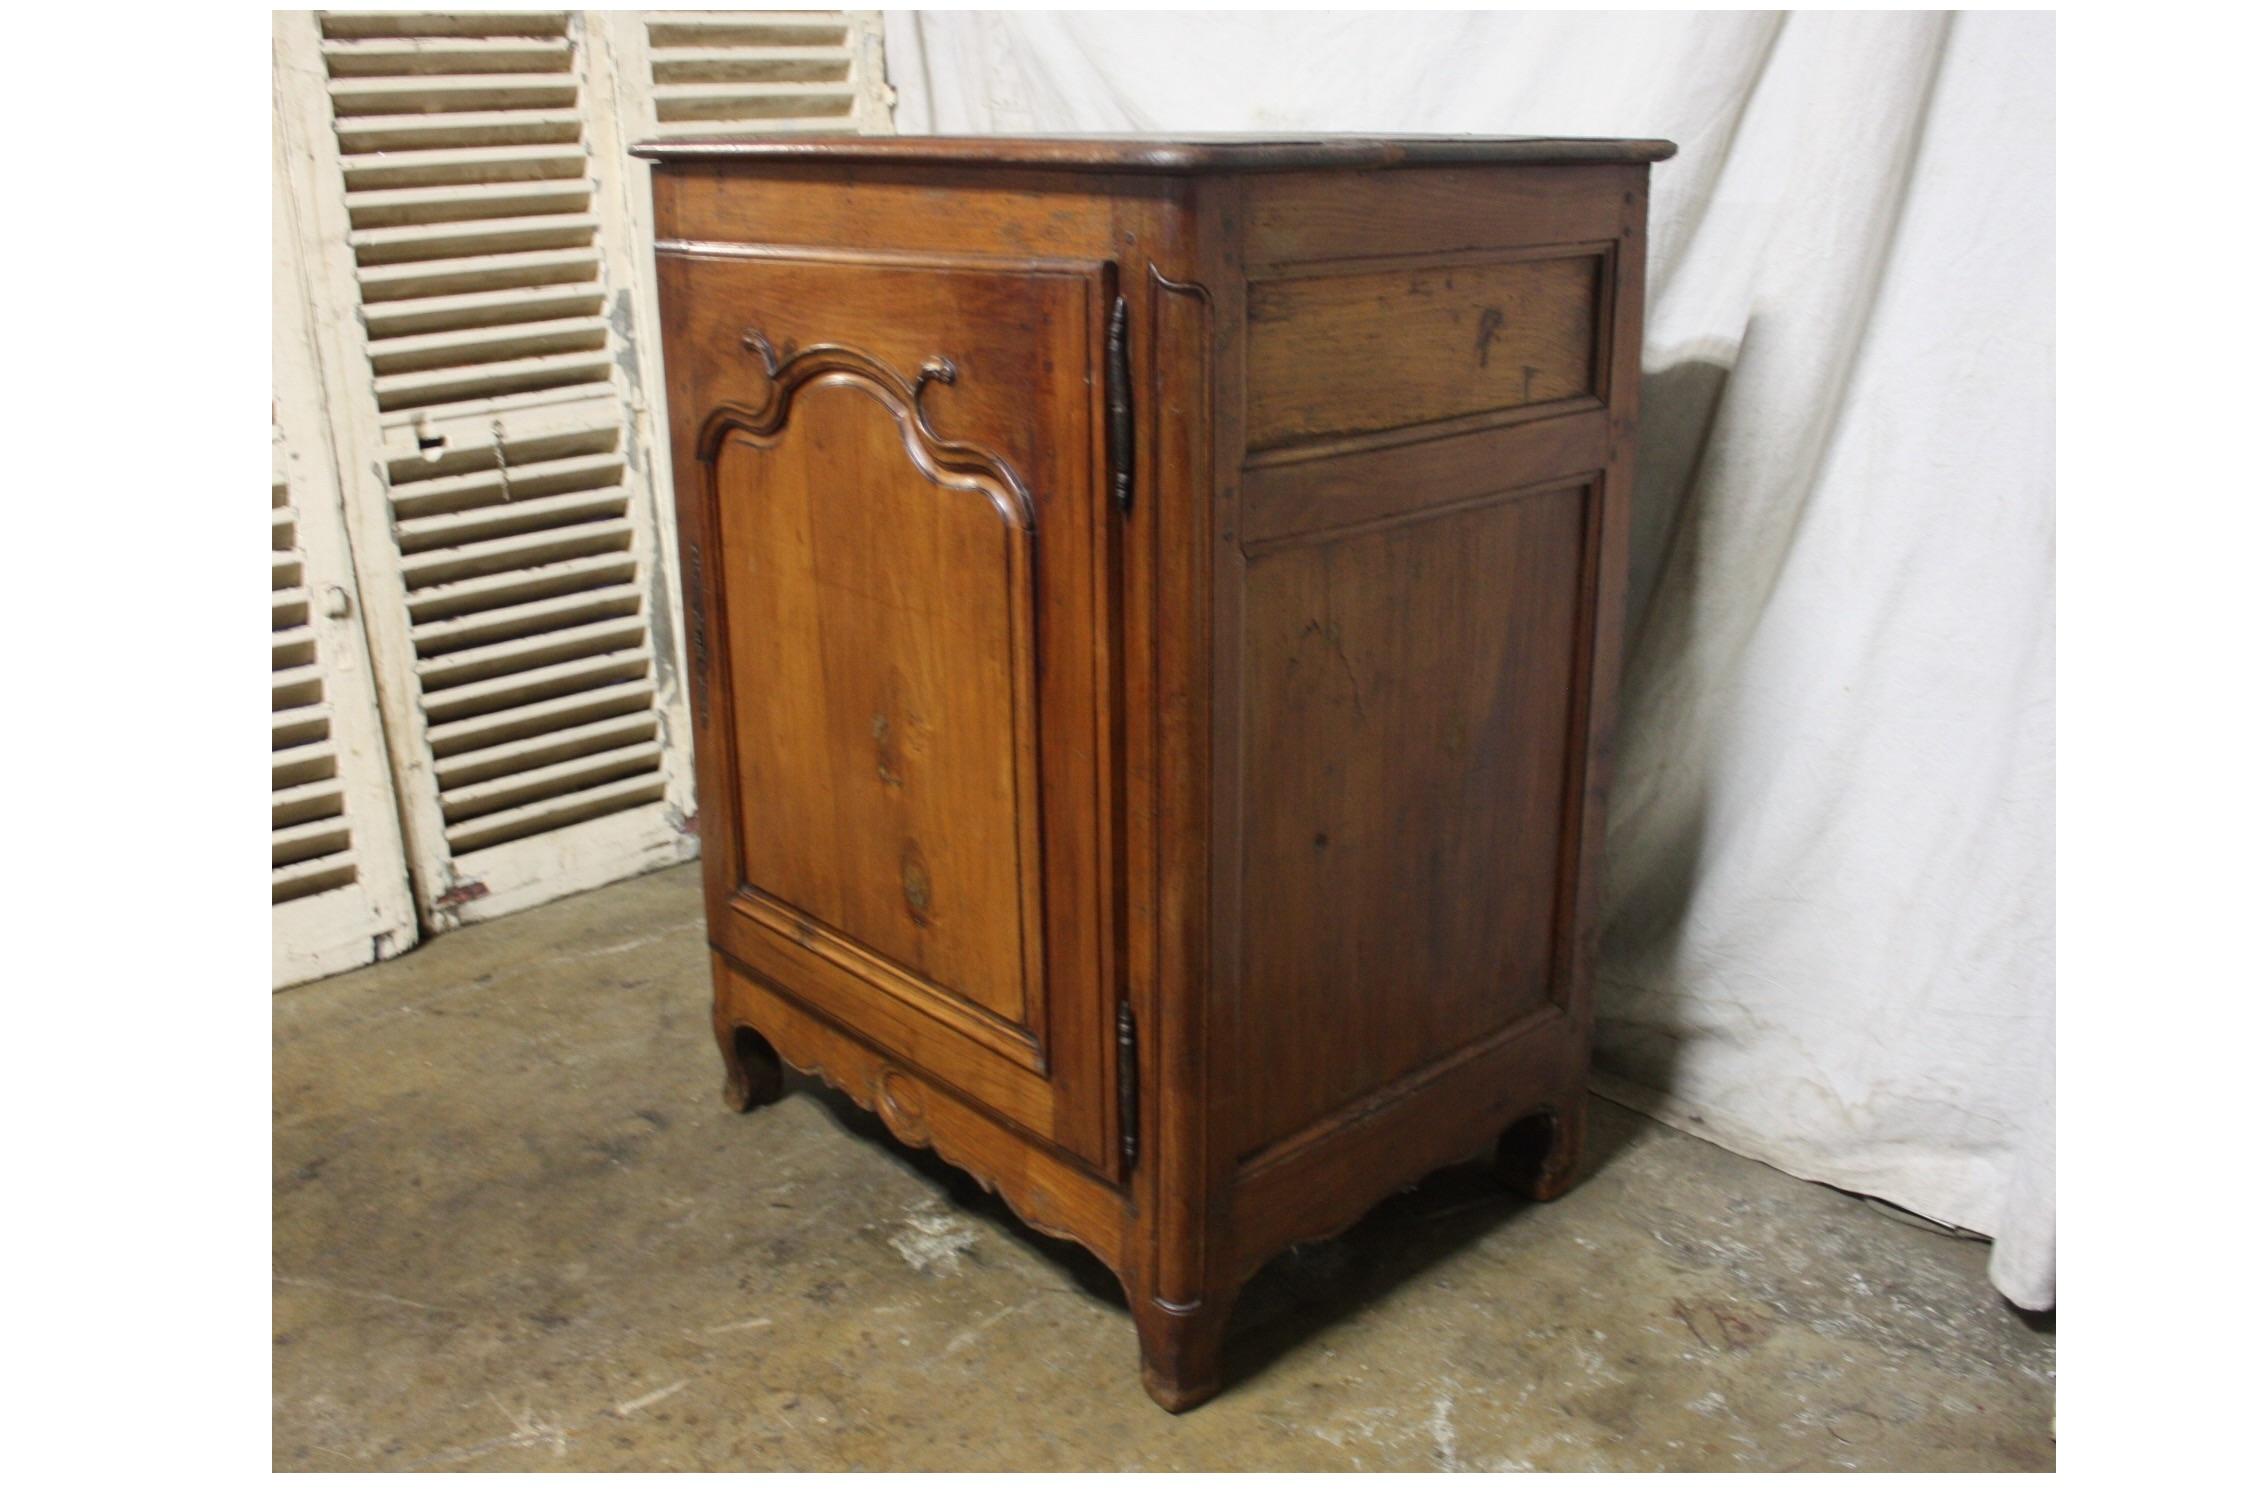 French 18th Century Buffet Confiturier In Good Condition For Sale In Stockbridge, GA